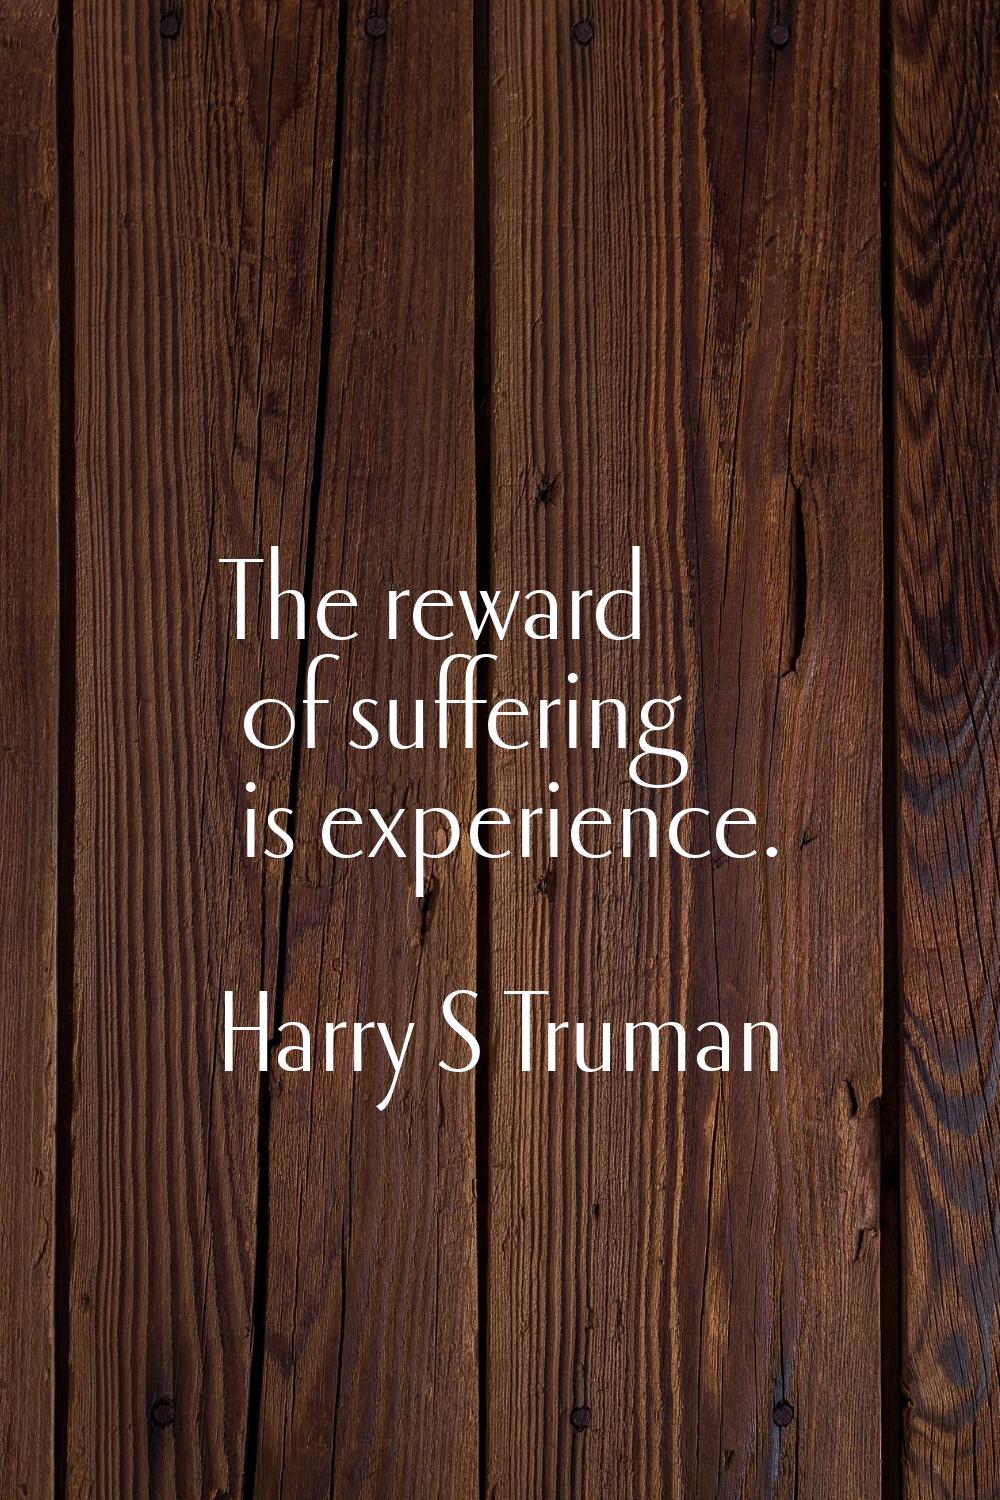 The reward of suffering is experience.